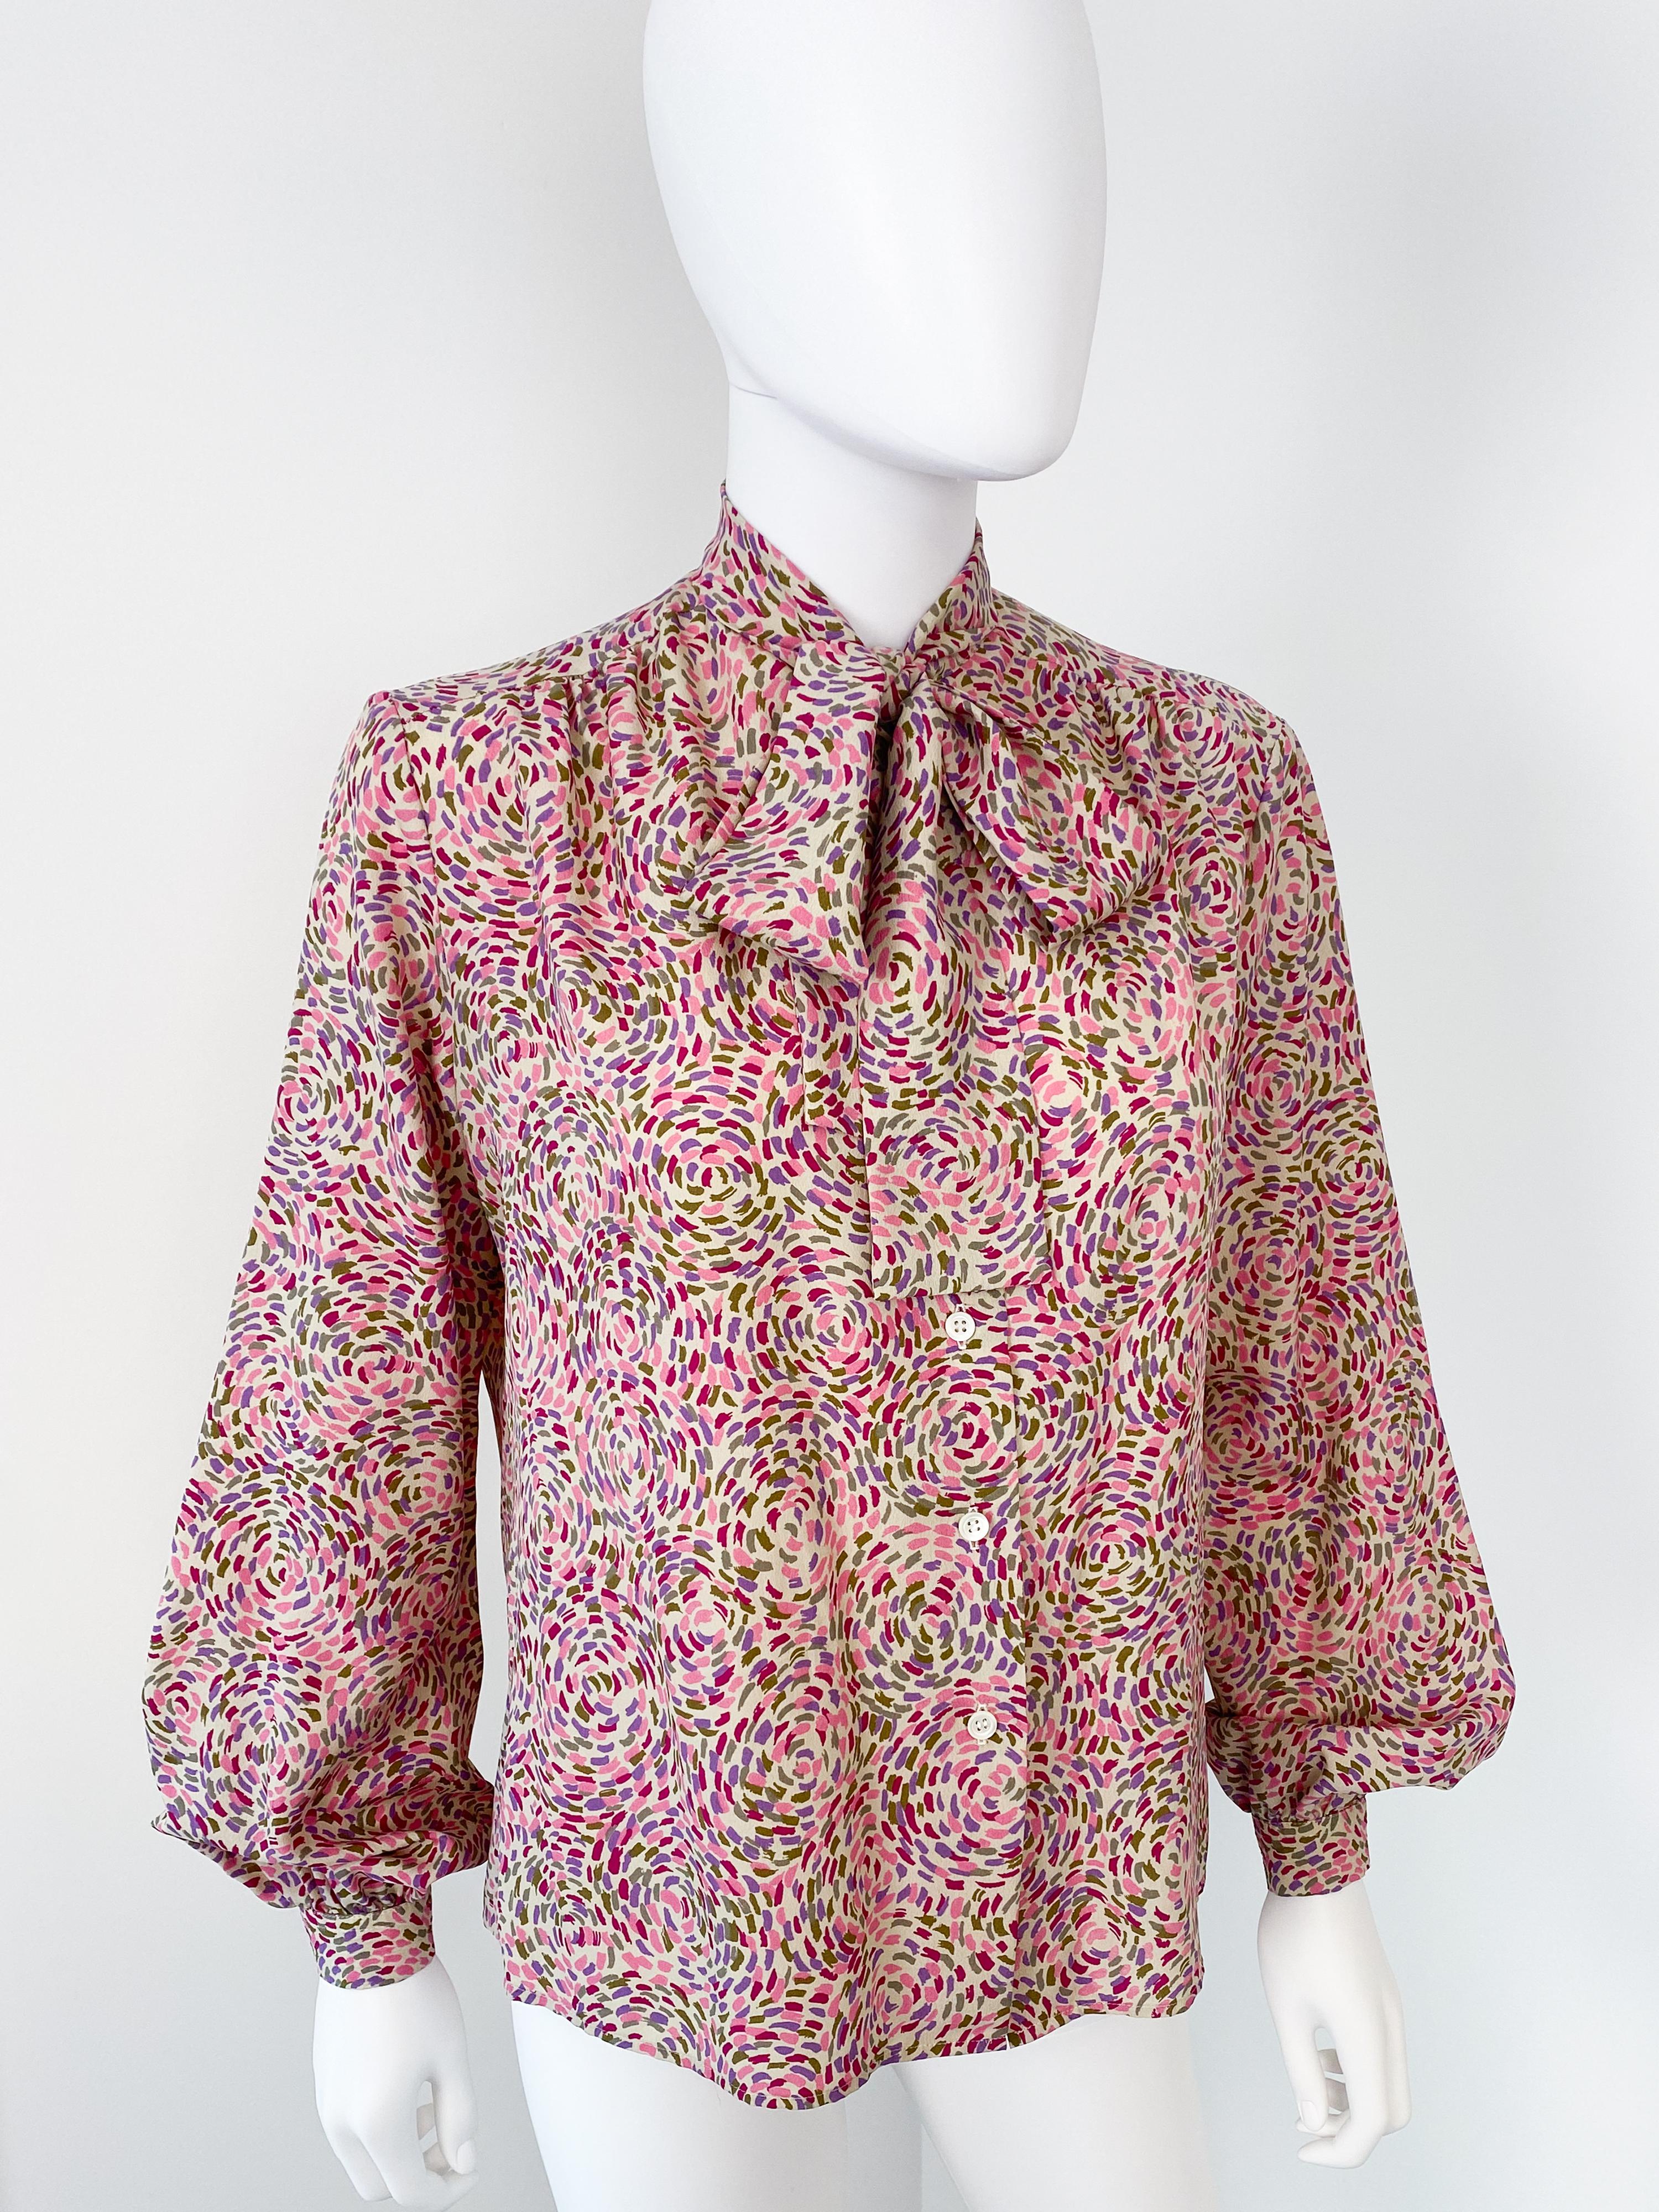 Wonderful vintage 1980s silky polyester pussy bow blouse with original tie. Pointillism print pattern in pink, purple, burgundy, and green colors over an off-white background. Long sleeves shape with ample pleating at the button cuffs to provide